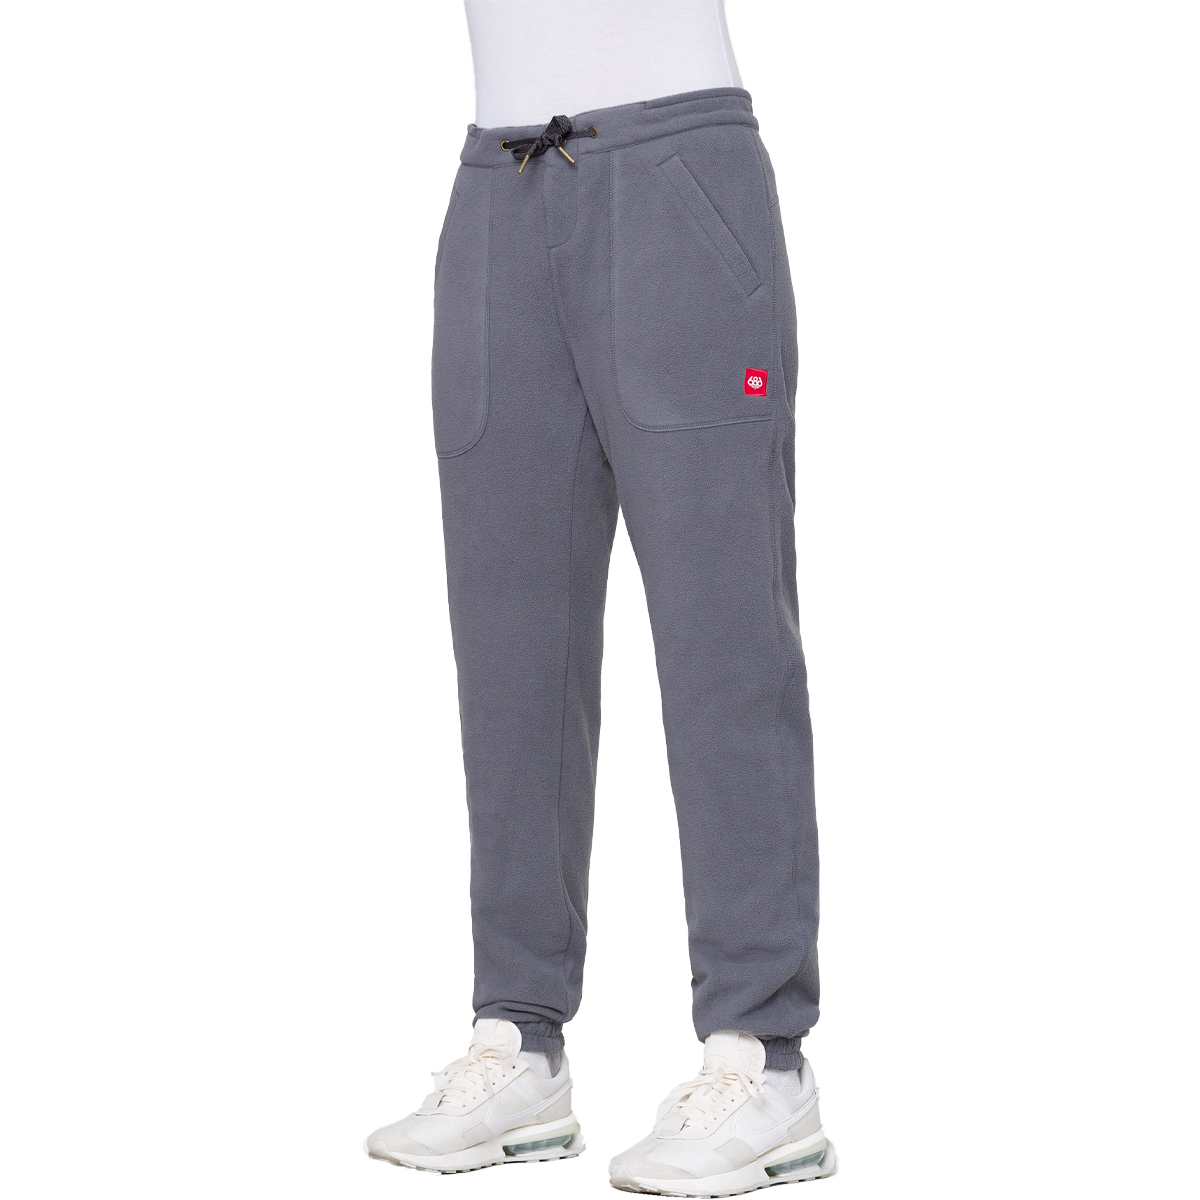 Women's Smarty 3-in-1 Cargo Pant alternate view